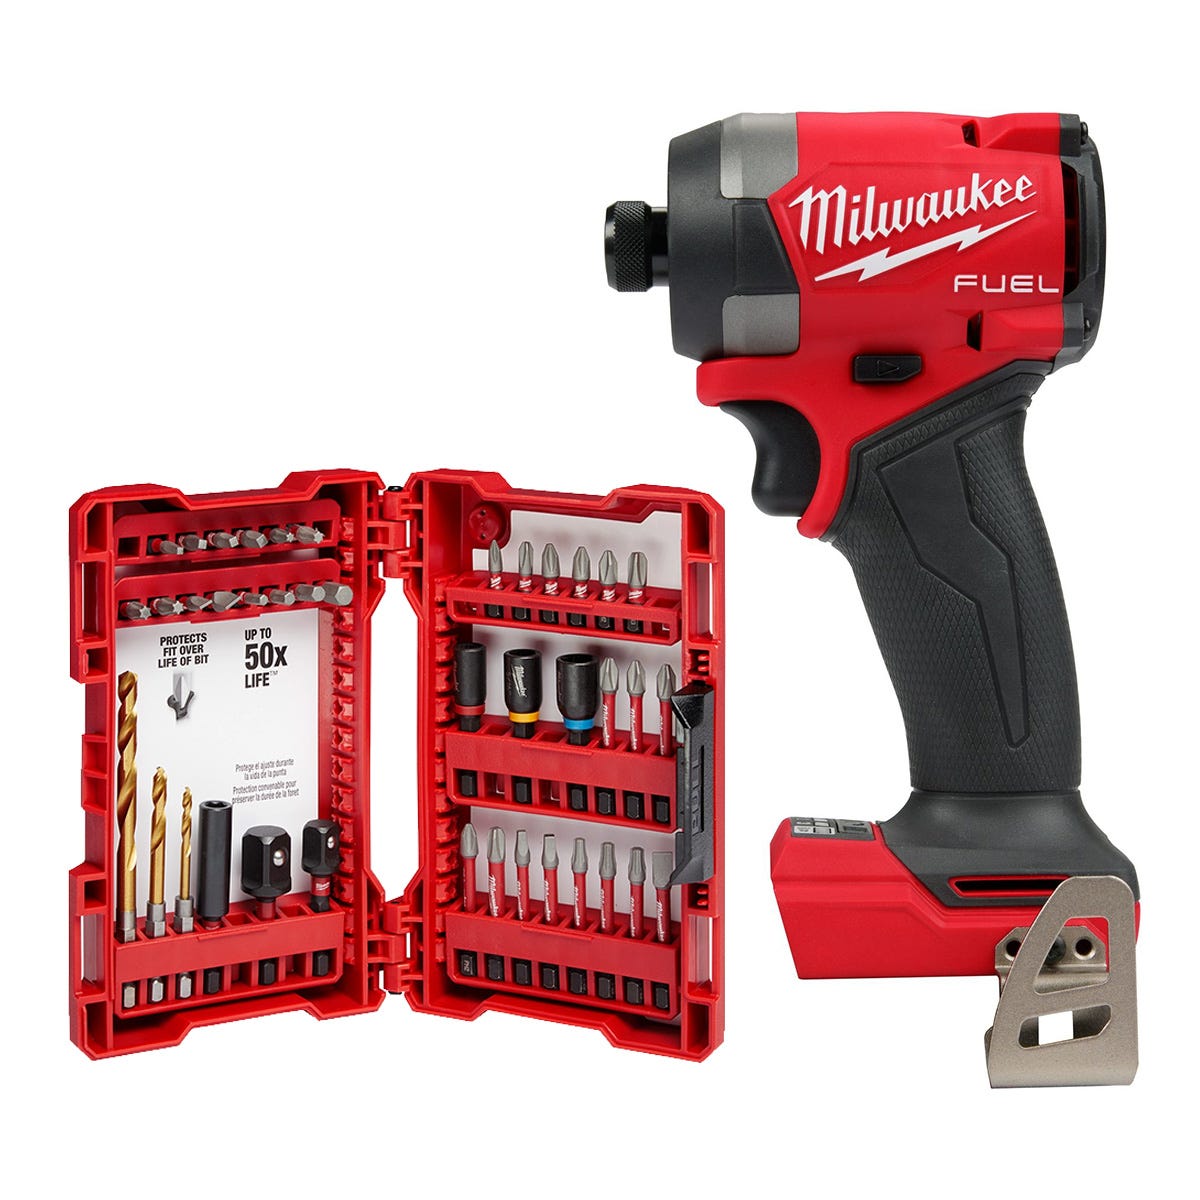 Milwaukee 2953-20 M18 FUEL Gen4 1/4-in. Hex Impact Driver, Tool Only with  SHOCKWAVE Impact Duty 40-Piece Drill and Drive Bit Set